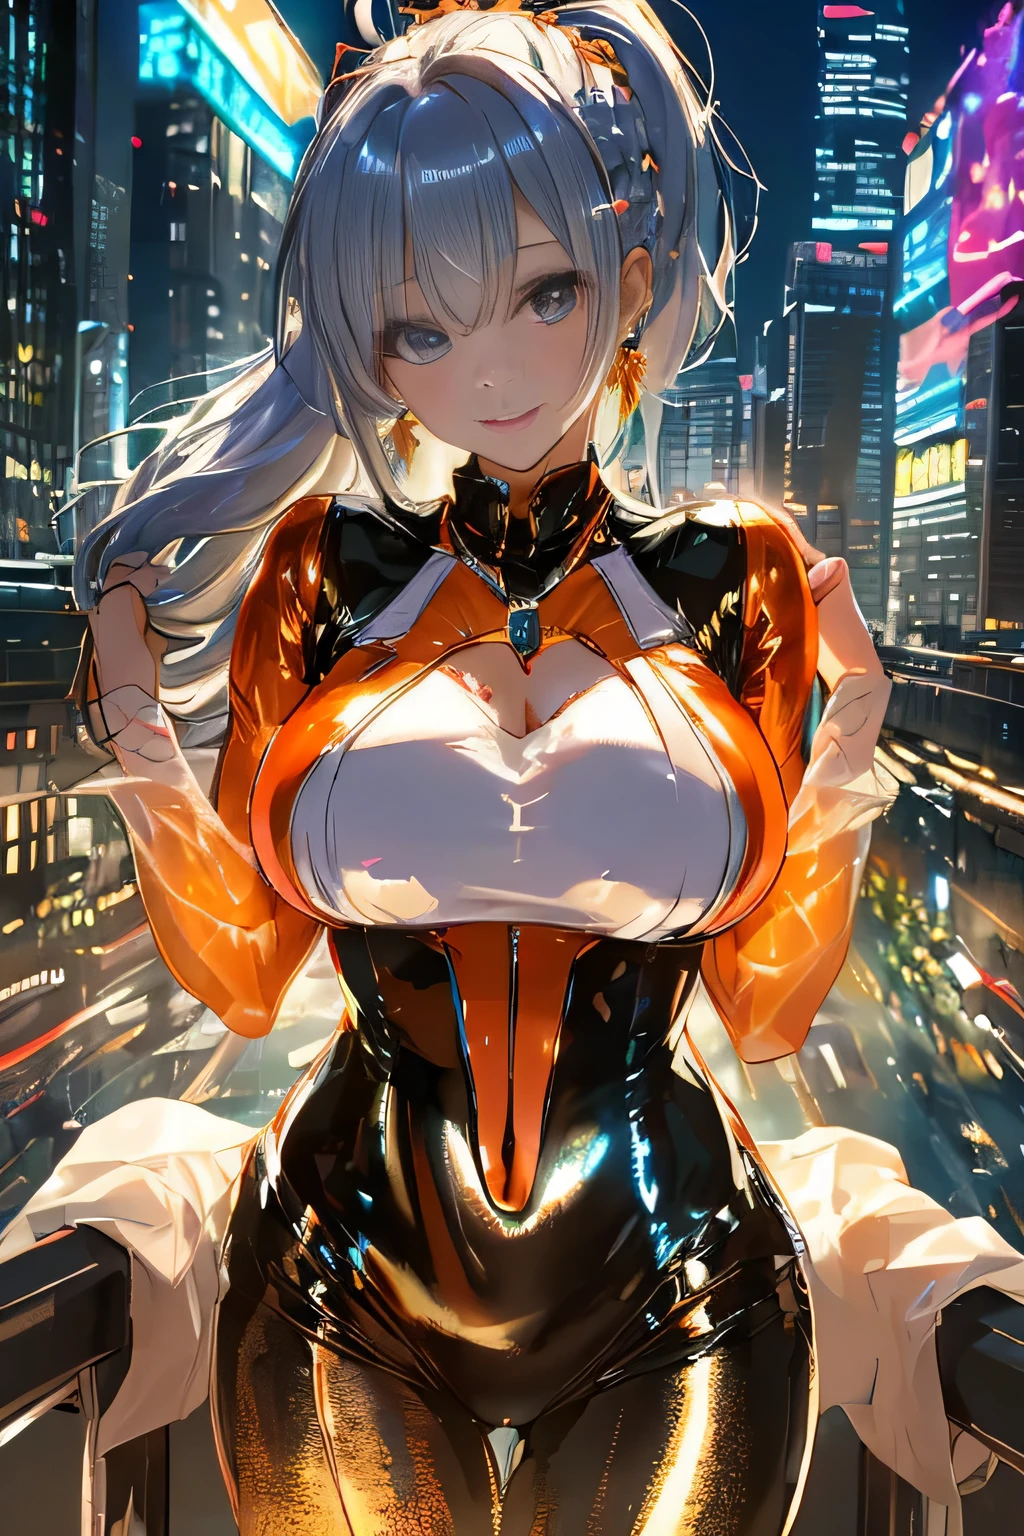 cyber city at night,(Gorgeous night view illumination:1.3).(Sexy super shiny orange transparent holographic mechanical suit:1.3) ,necklace,earrings, smile.sexy pose, (silver hair、Ponytail twisted buns decorated with elaborate braids and beads,Braided setup fishbone hair,colorful hair tips),(The bangs are see-through bangs),(hairpin、ponytail、floating hair、),Breast flick,(emphasize big breasts:1.3),professional lighting,cinematic light,(table top,highest quality,Ultra high resolution output image,) ,(8K quality,),(sea art 2 mode:1.3),,(Image mode Ultra HD,)